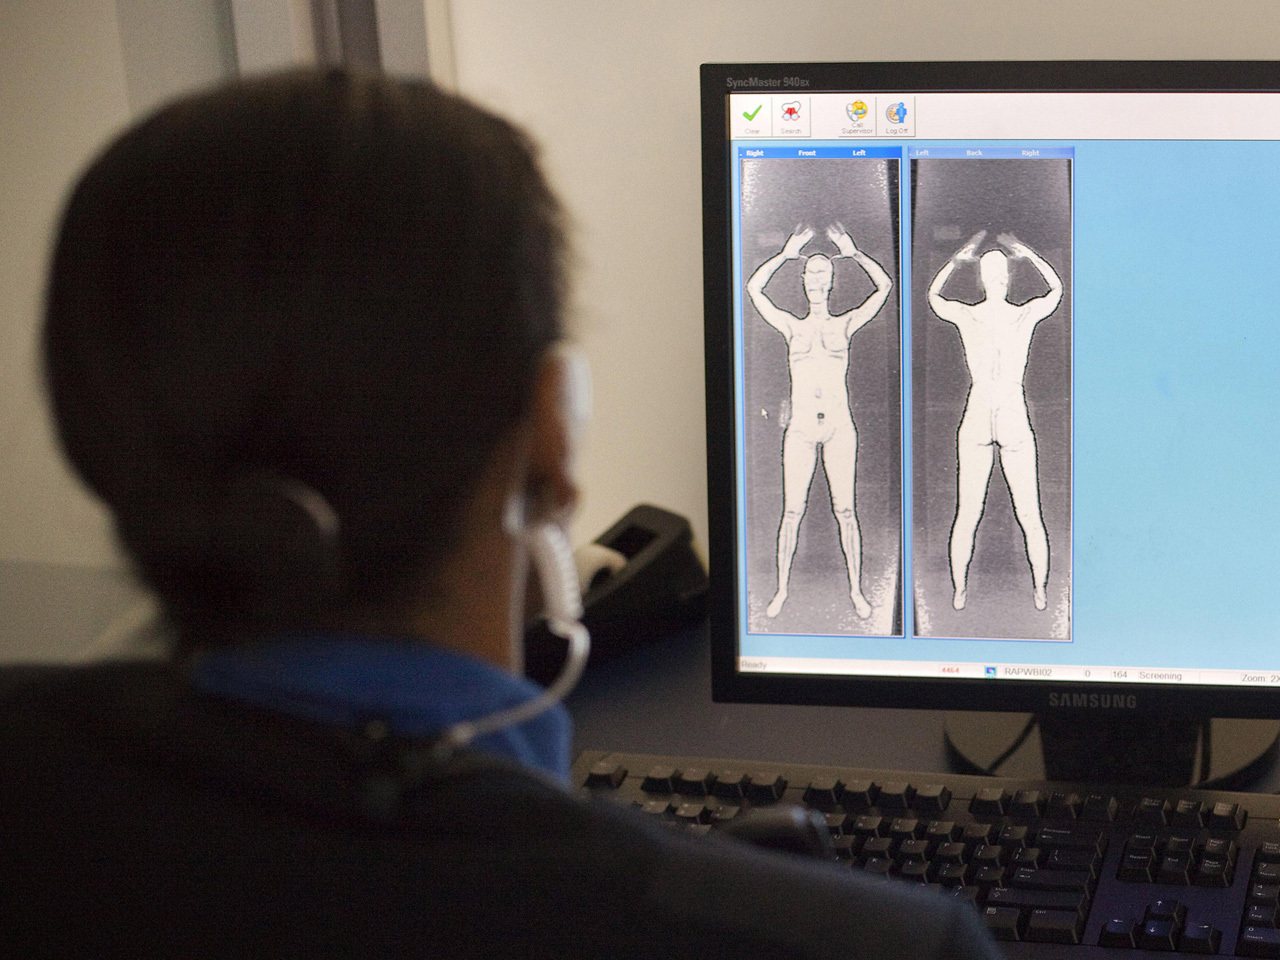 TSA has completely removed revealing X-ray scanners: rep 